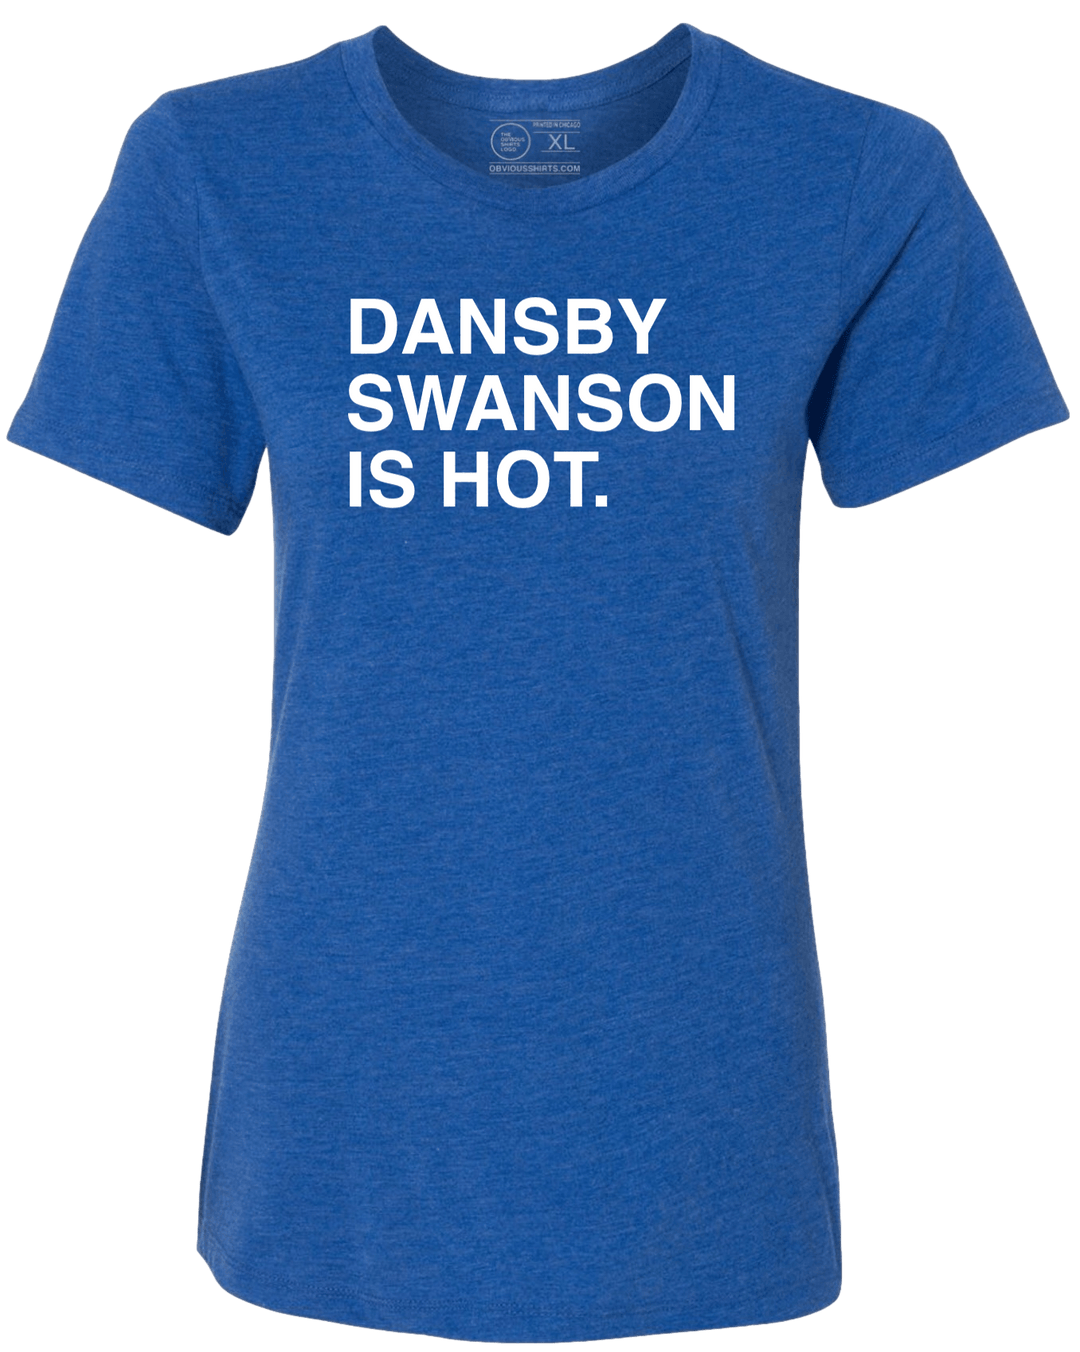 DANSBY SWANSON IS HOT. (WOMEN'S CREW) - OBVIOUS SHIRTS